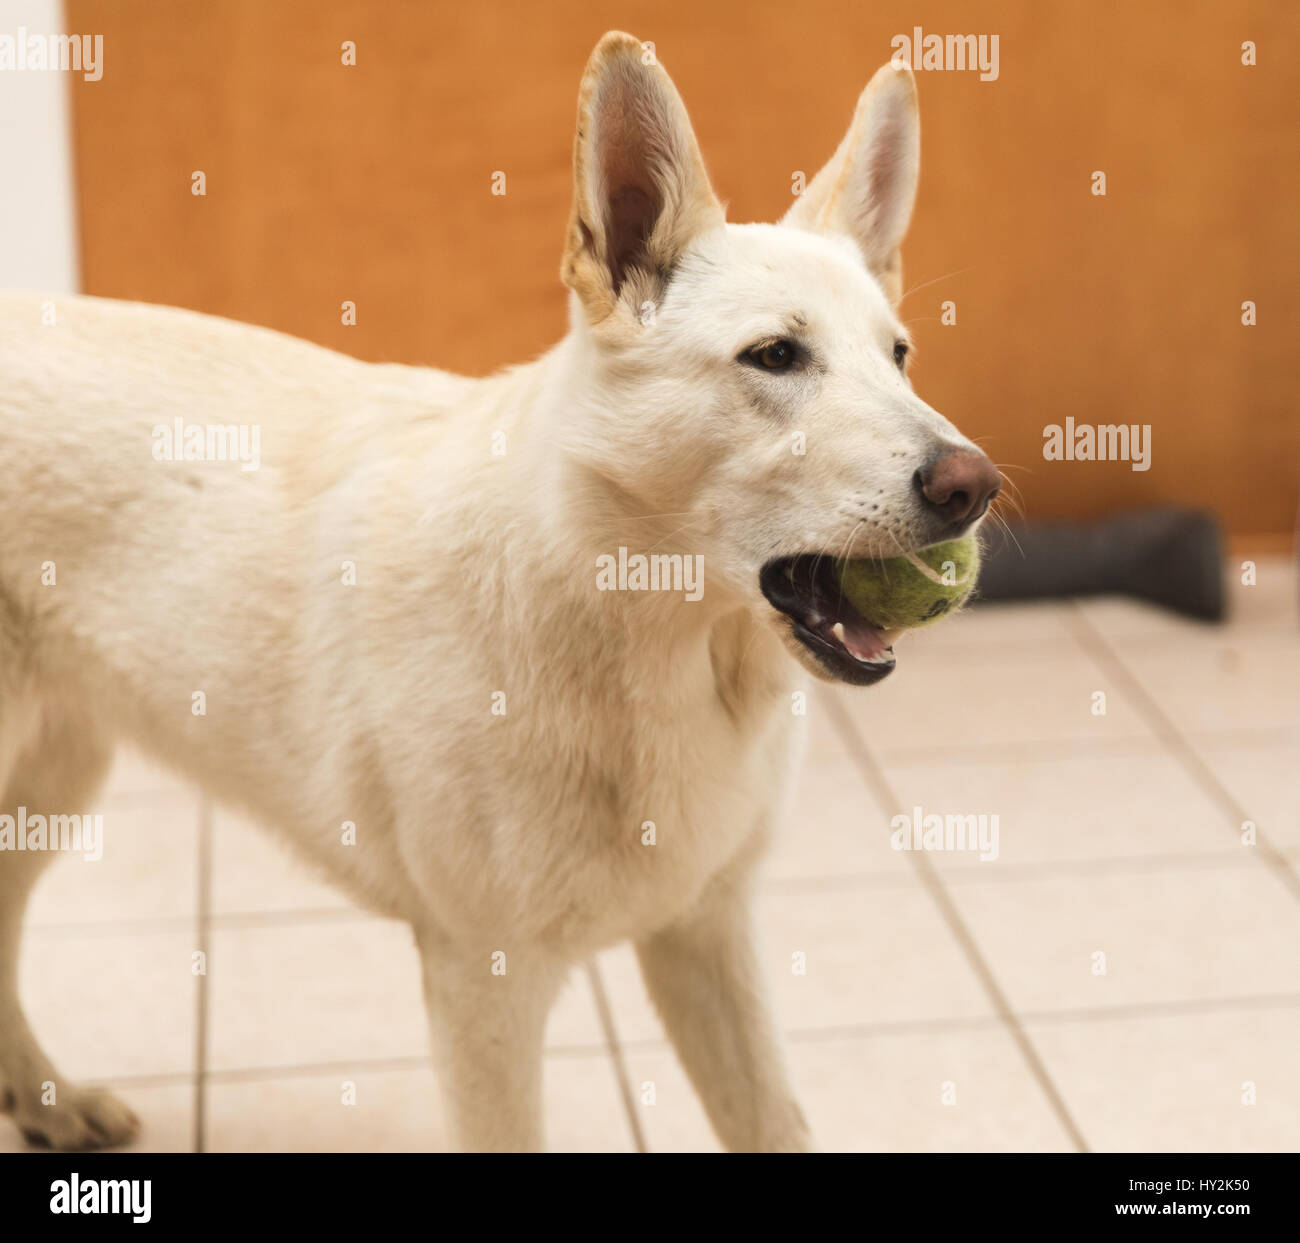 White shepherd dog with large ears holding a tennis ball in its mouth. Stock Photo